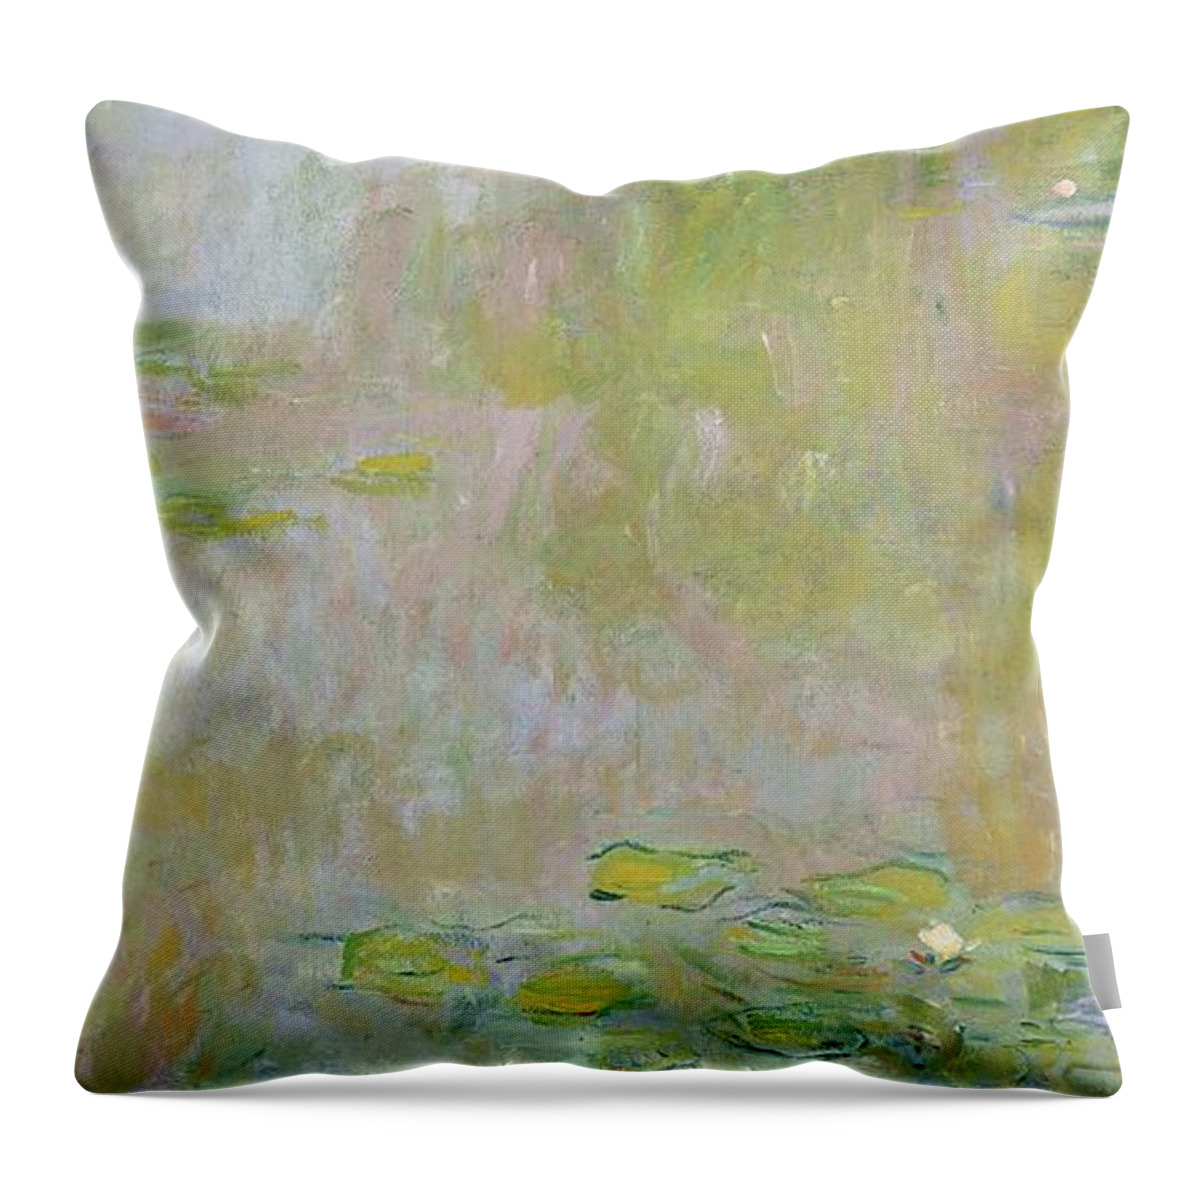 Waterlilies At Giverny Throw Pillow featuring the painting Waterlilies at Giverny by Claude Monet